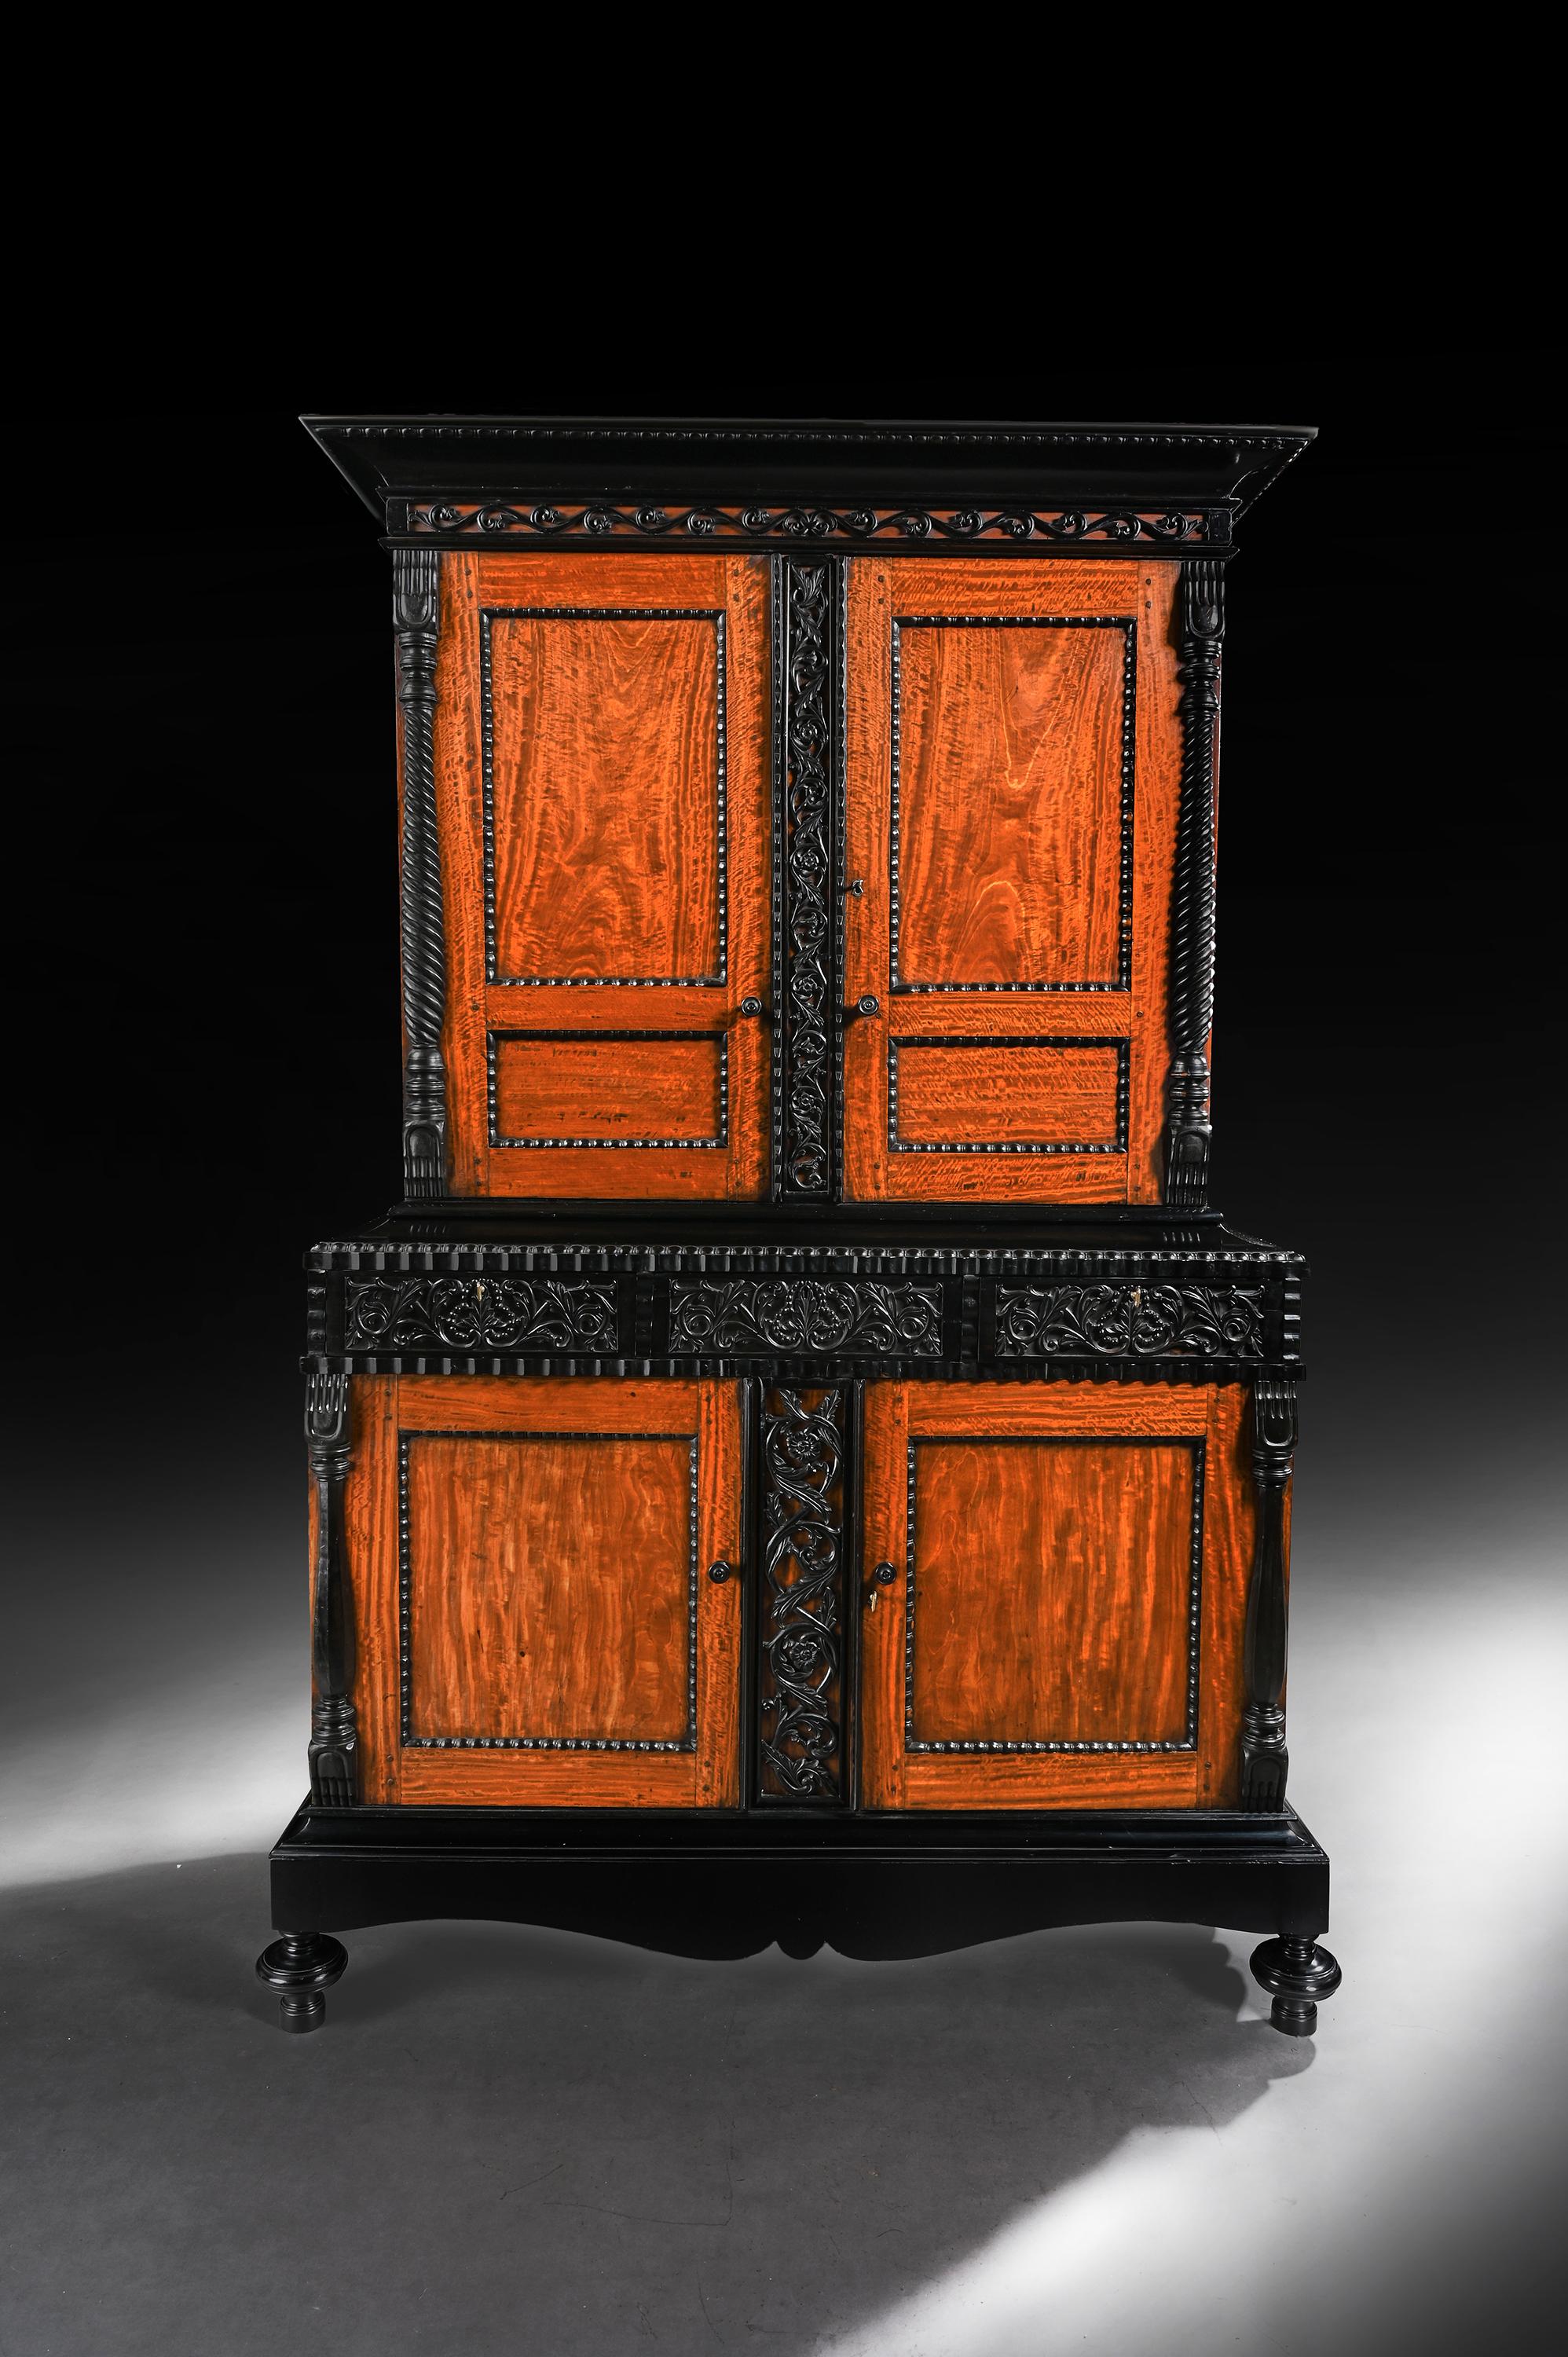 A fabulous exhibition quality 19th century Ceylonese Indo-Dutch solid satinwood and ebony cabinet.

Ceylon (Sri Lanka), circa 1830.

A stunning and rare Dutch Colonial satinwood cabinet / armoire with ebony carved detail.

The solid ebony